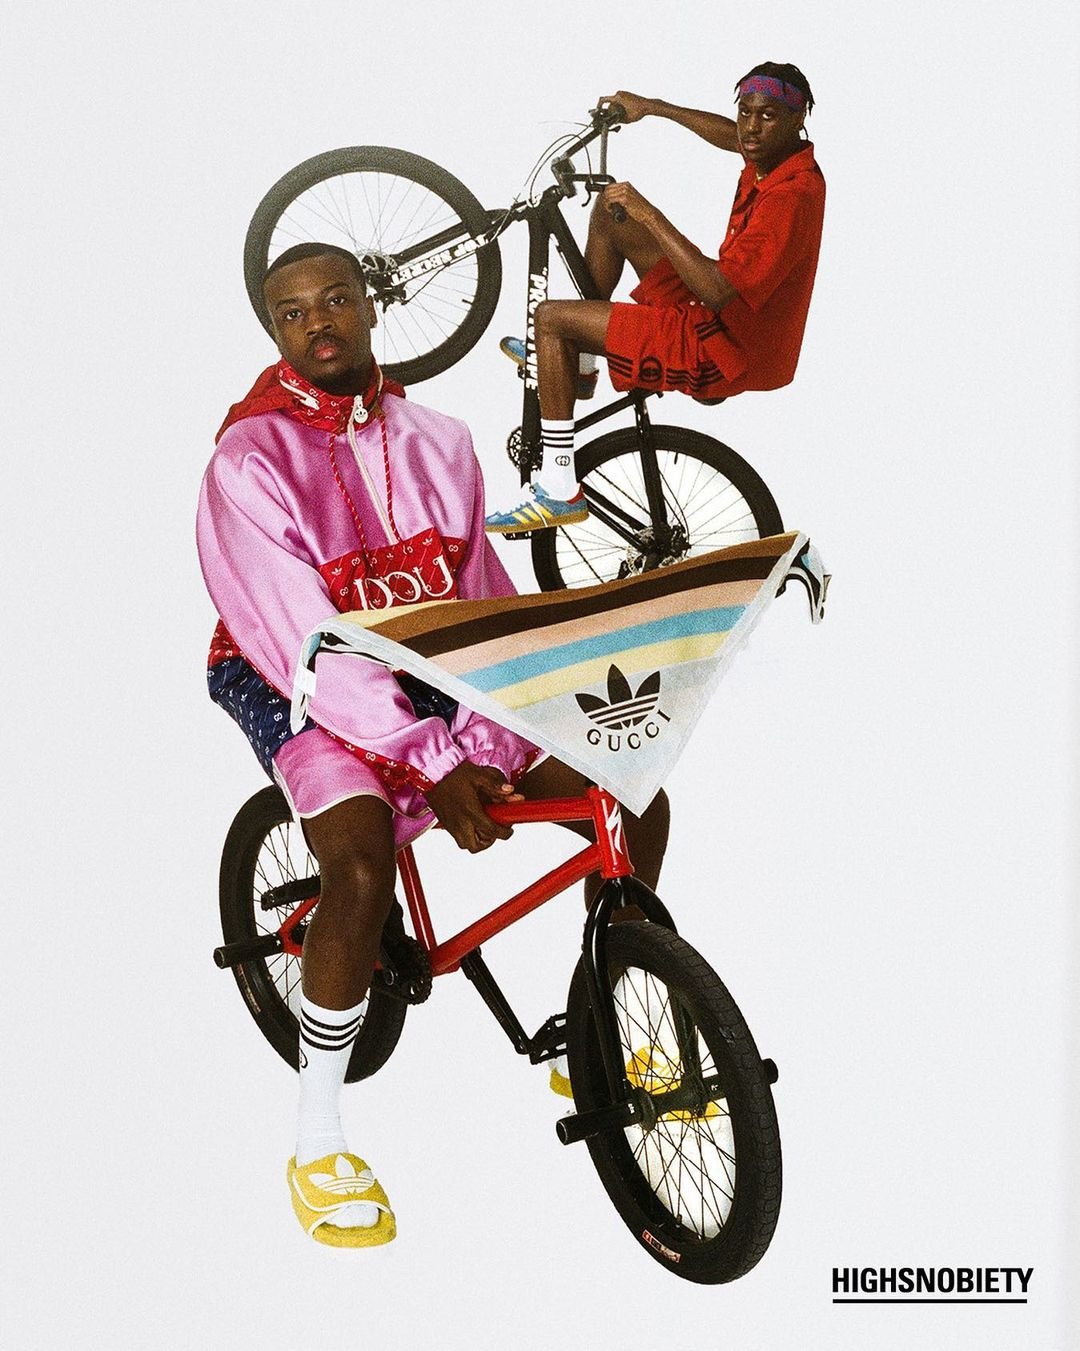 Official Blog of Be Electric Studios — Adidas x Gucci campaign was shot in  Be Electric Studios